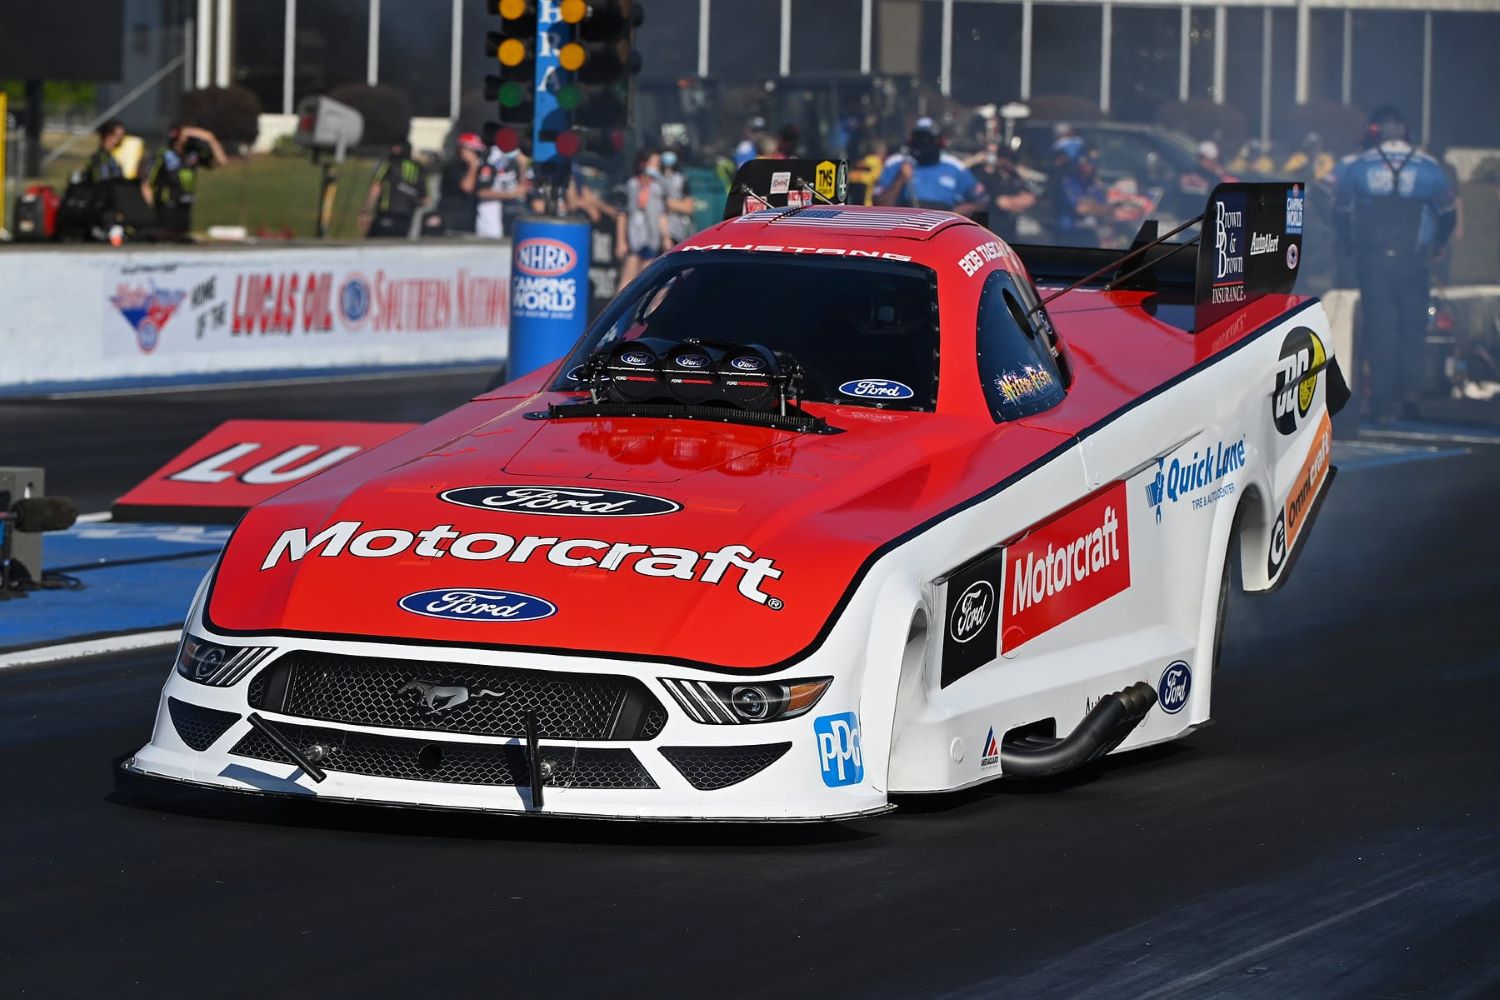 Bob Tasca III Stays Hot With Second 2021 NHRA Win In His Mustang Funny Car: Video